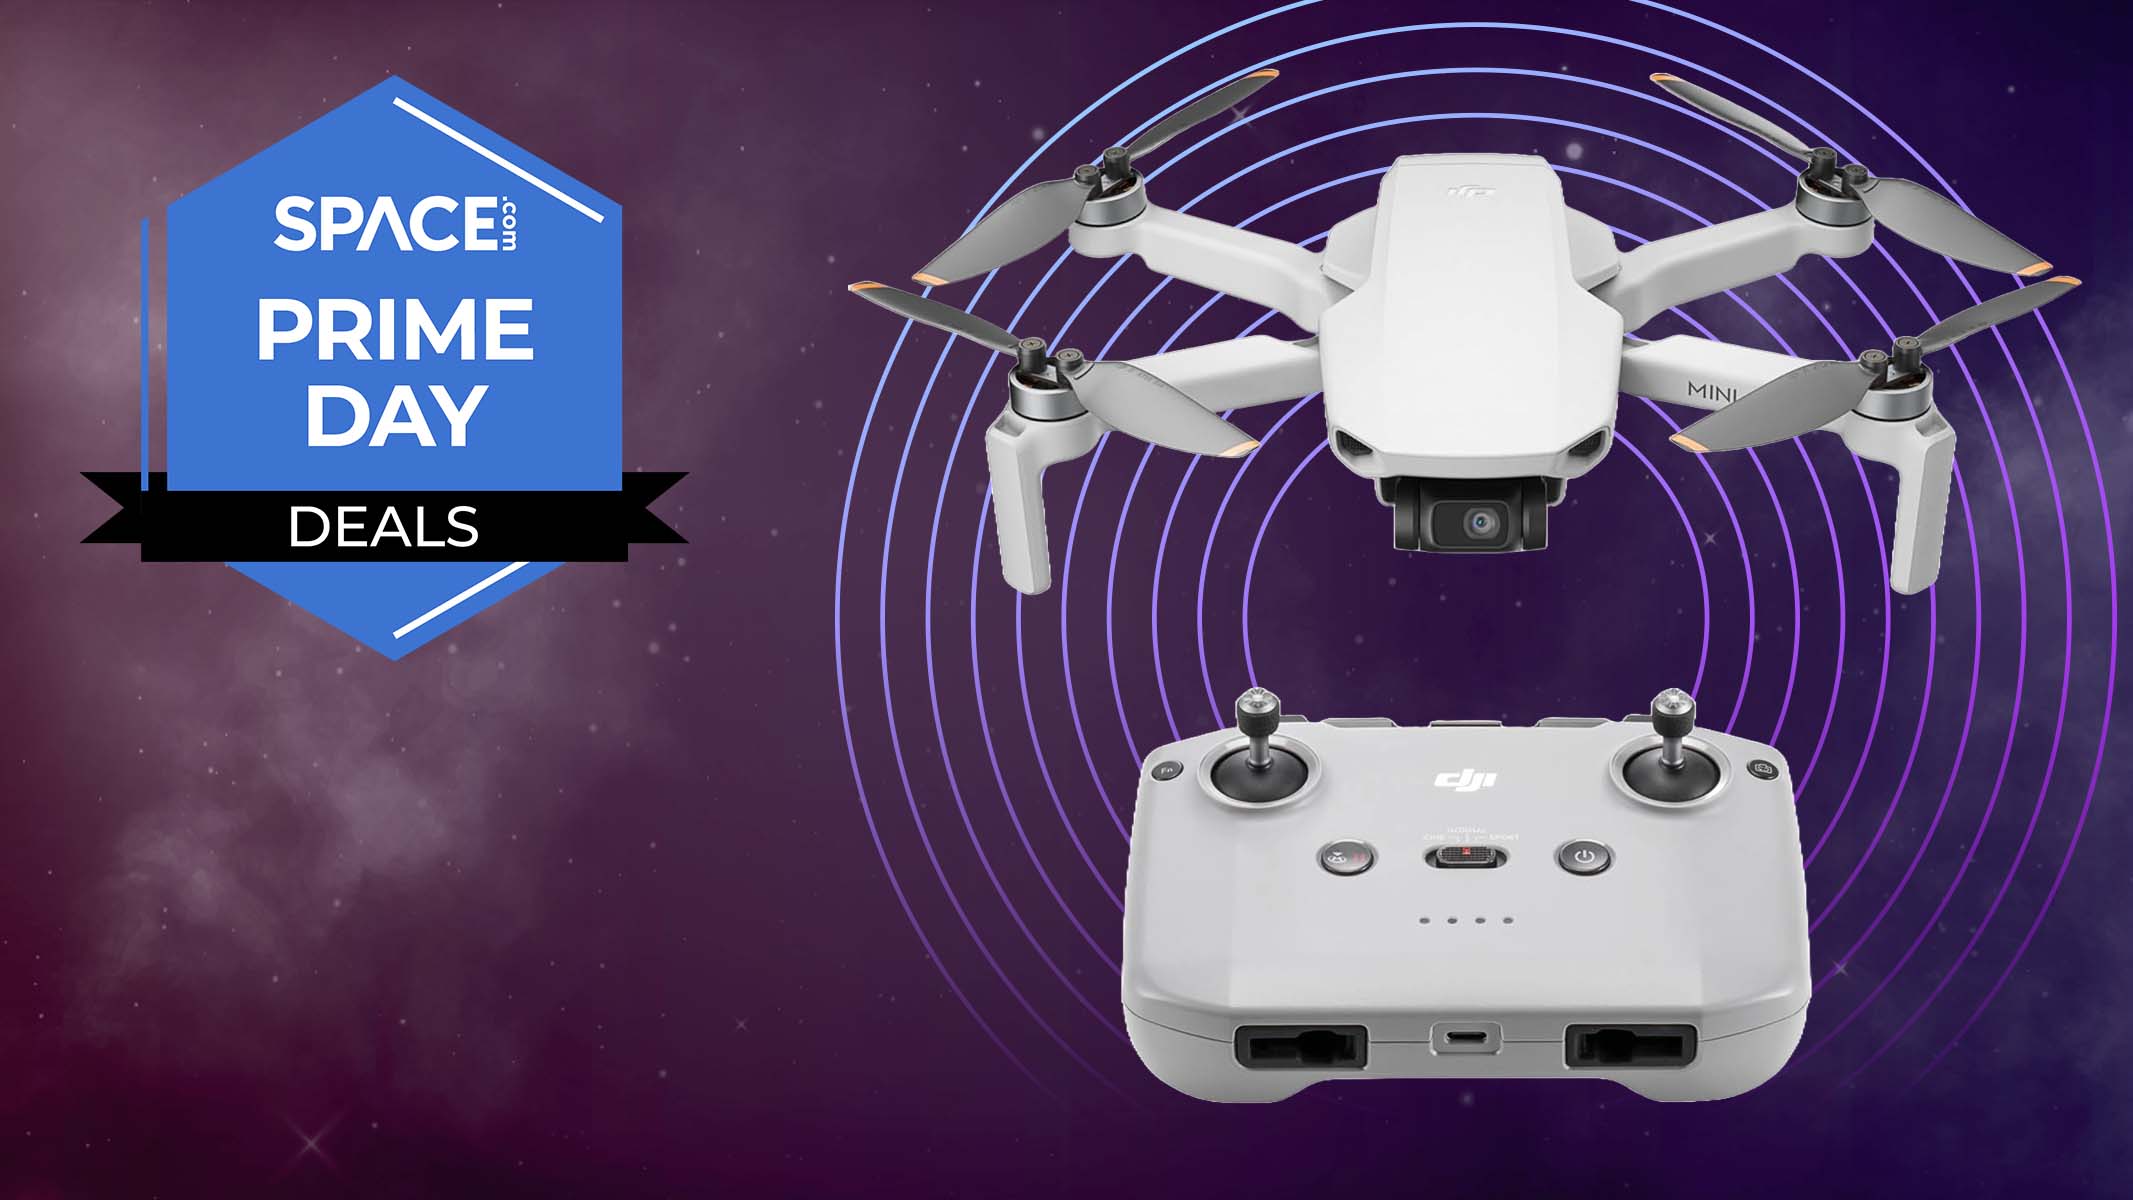  Explore the skies with the DJI Mini 4K camera drone, up to $90 off for Prime Day 